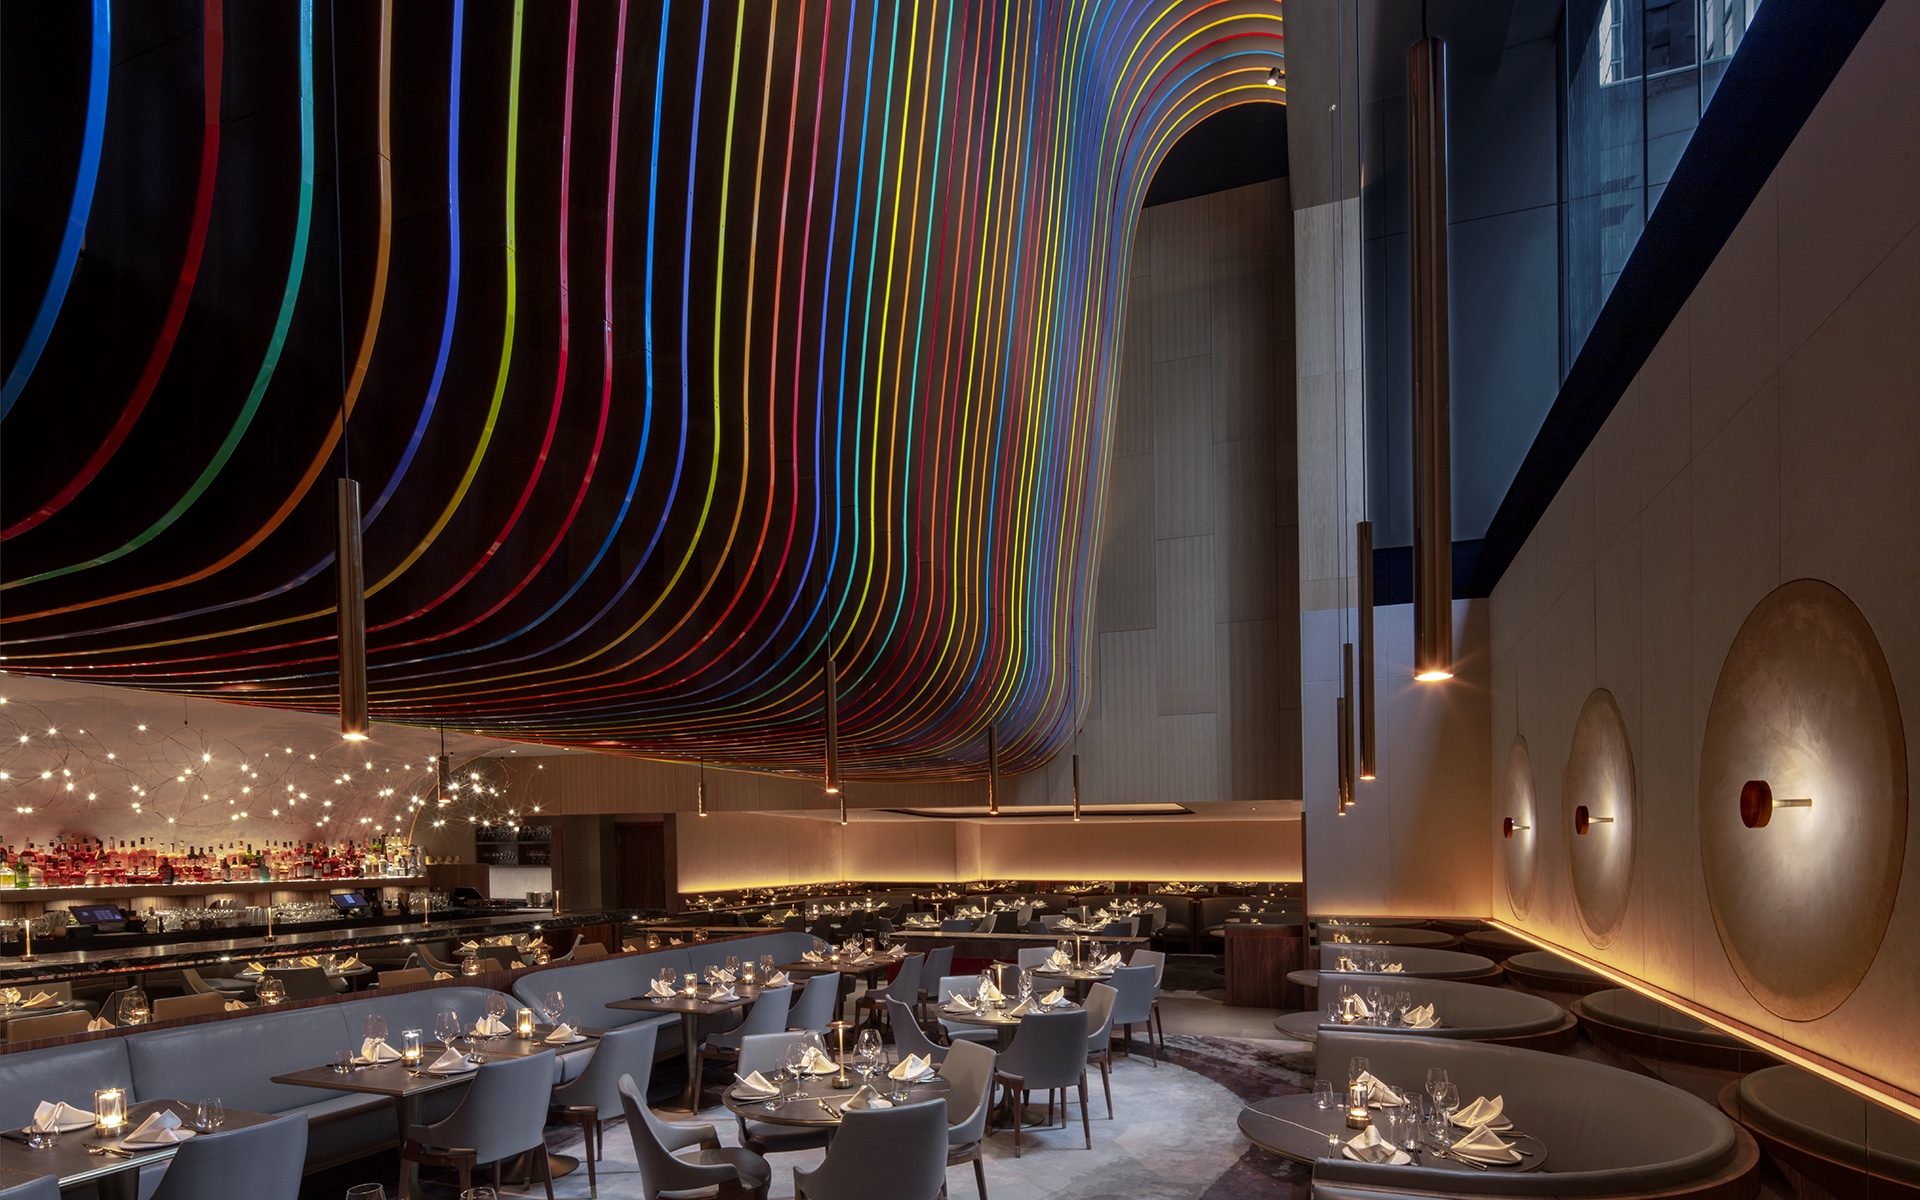 Prominent Midtown restaurant plans artful move to iconic Galleria